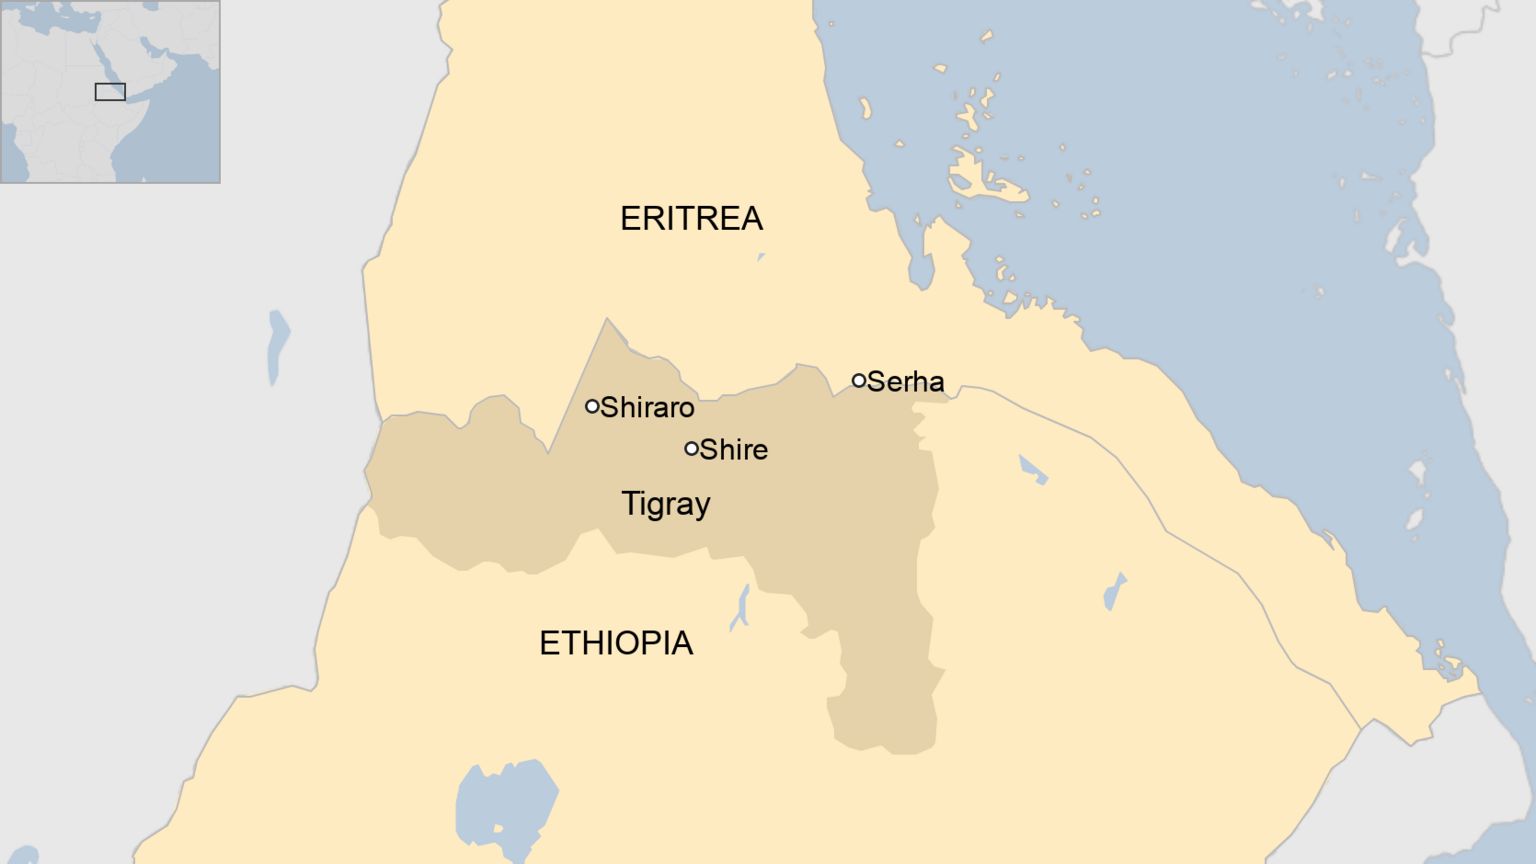 Map showing Eritrea and Ethiopia